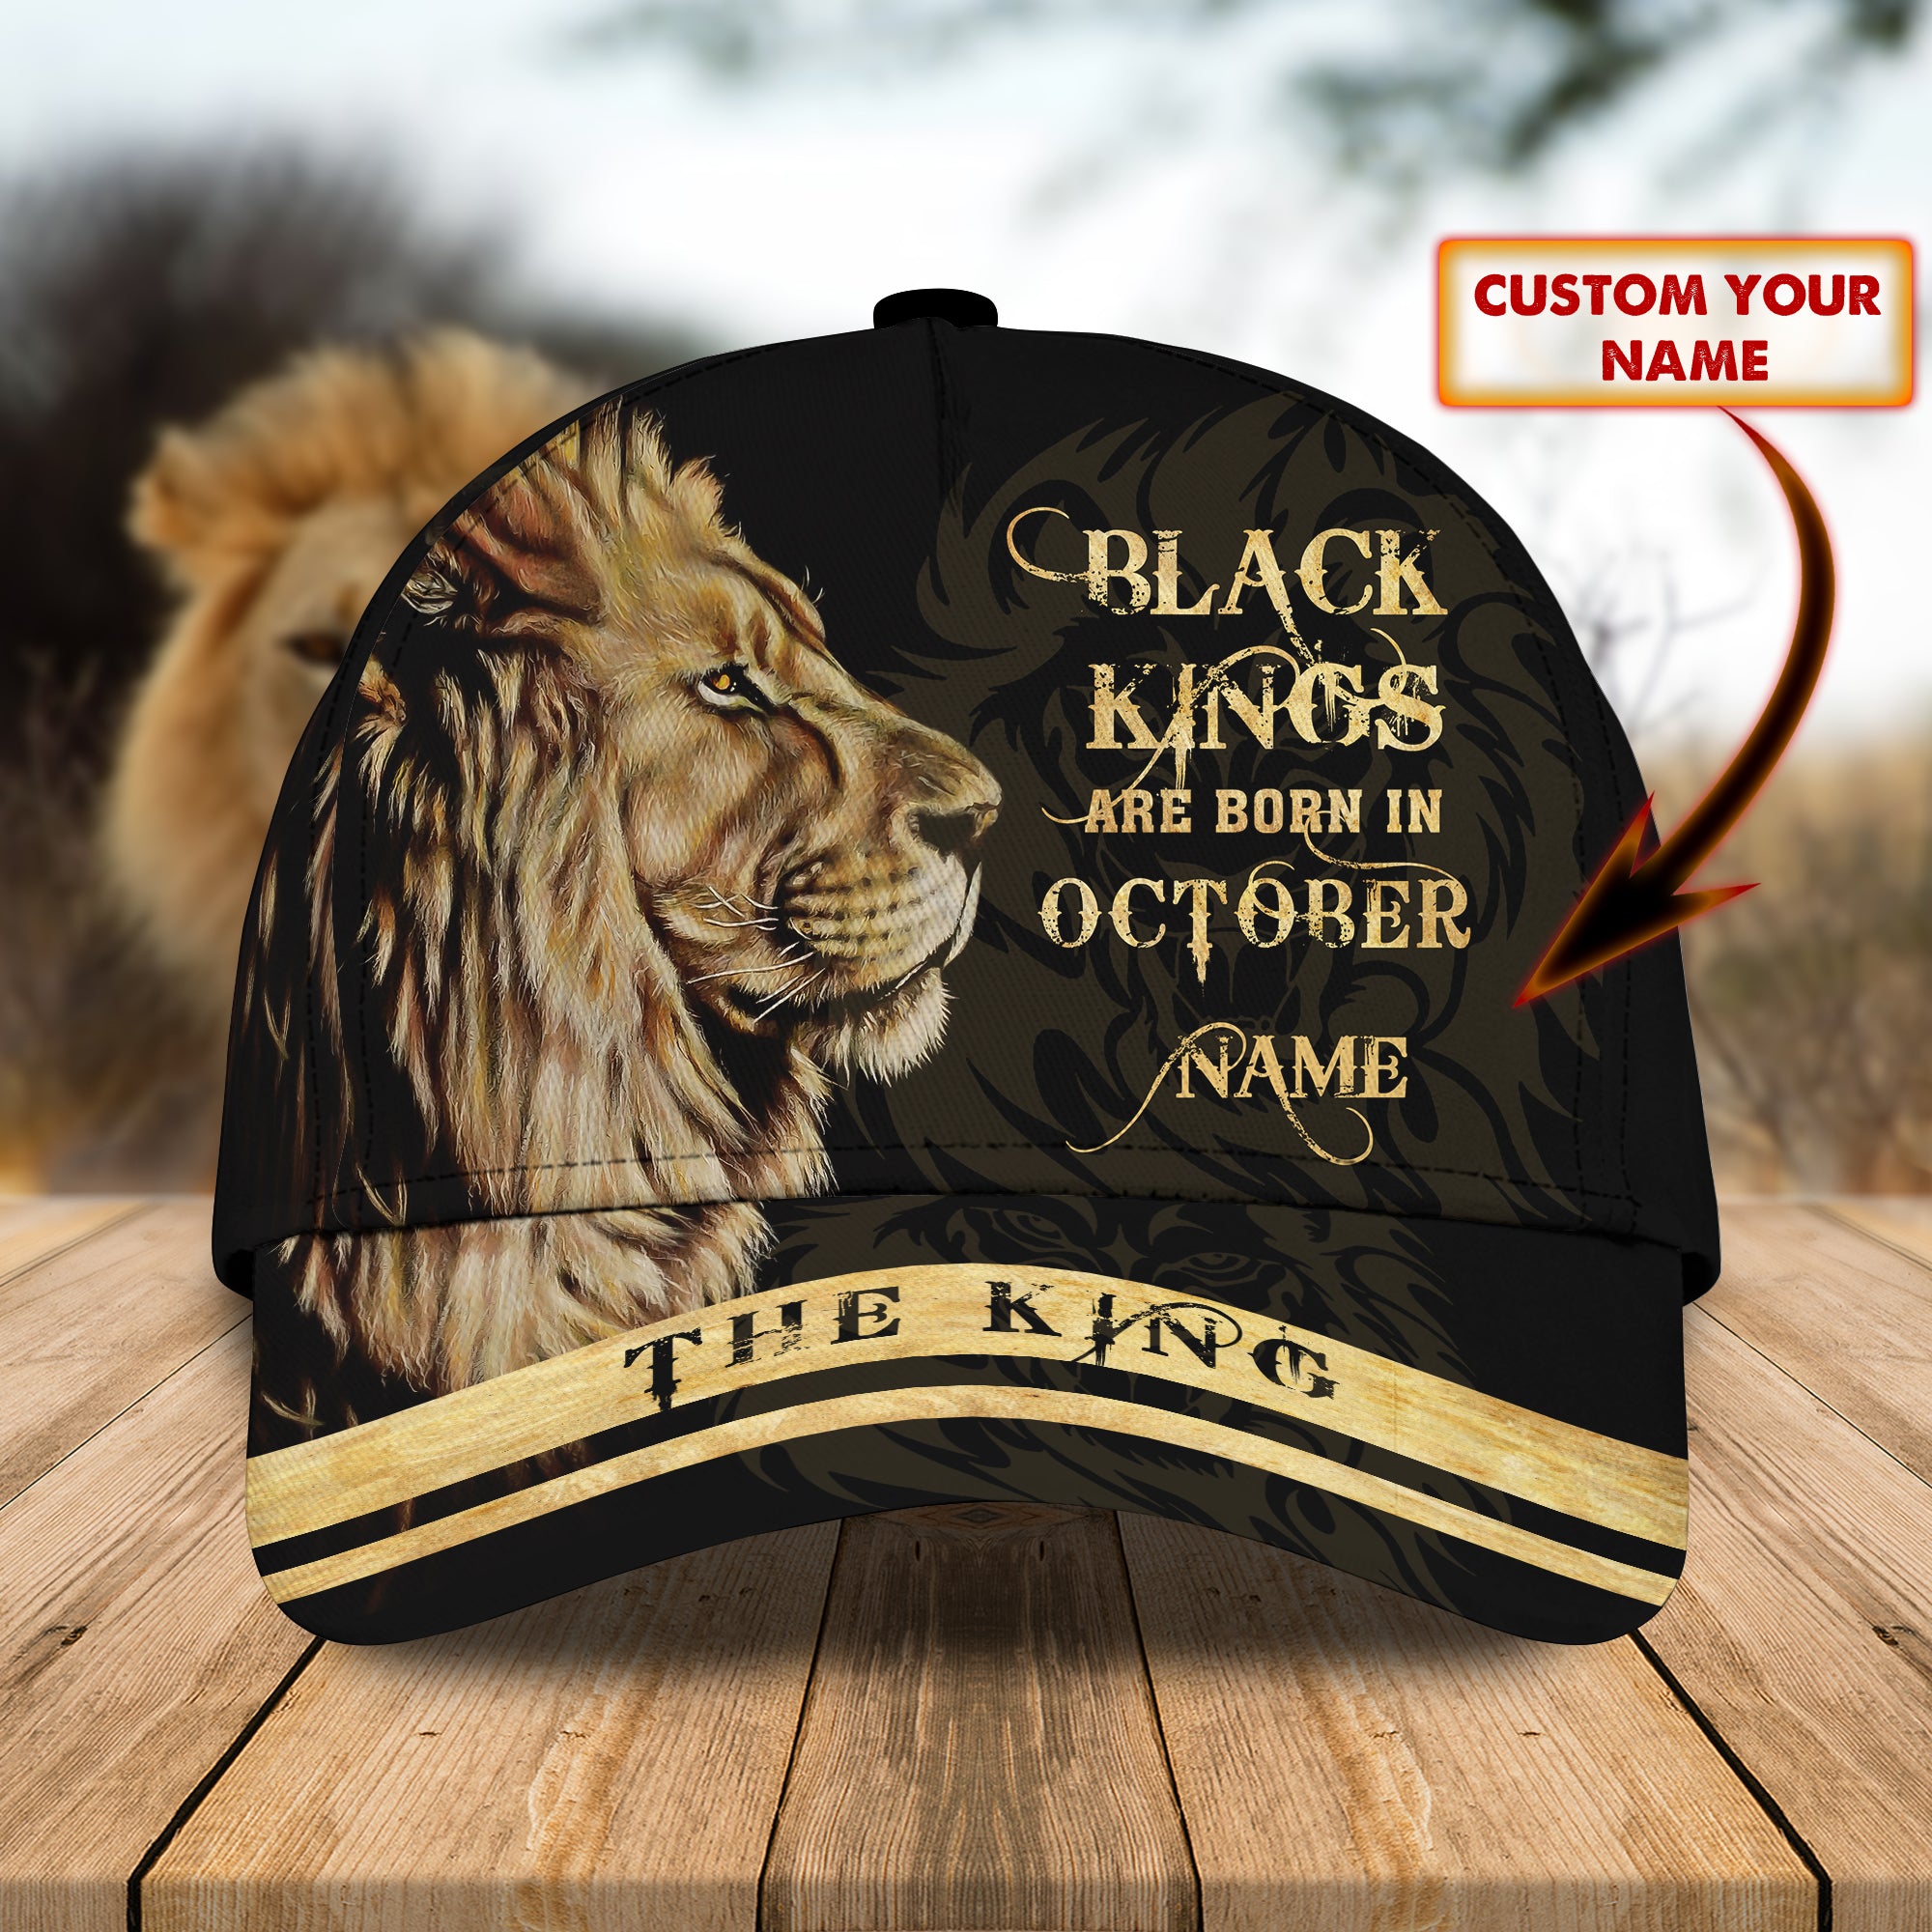 Black Kings Are Born In October - Personalized Name Cap 38 - Bhn97